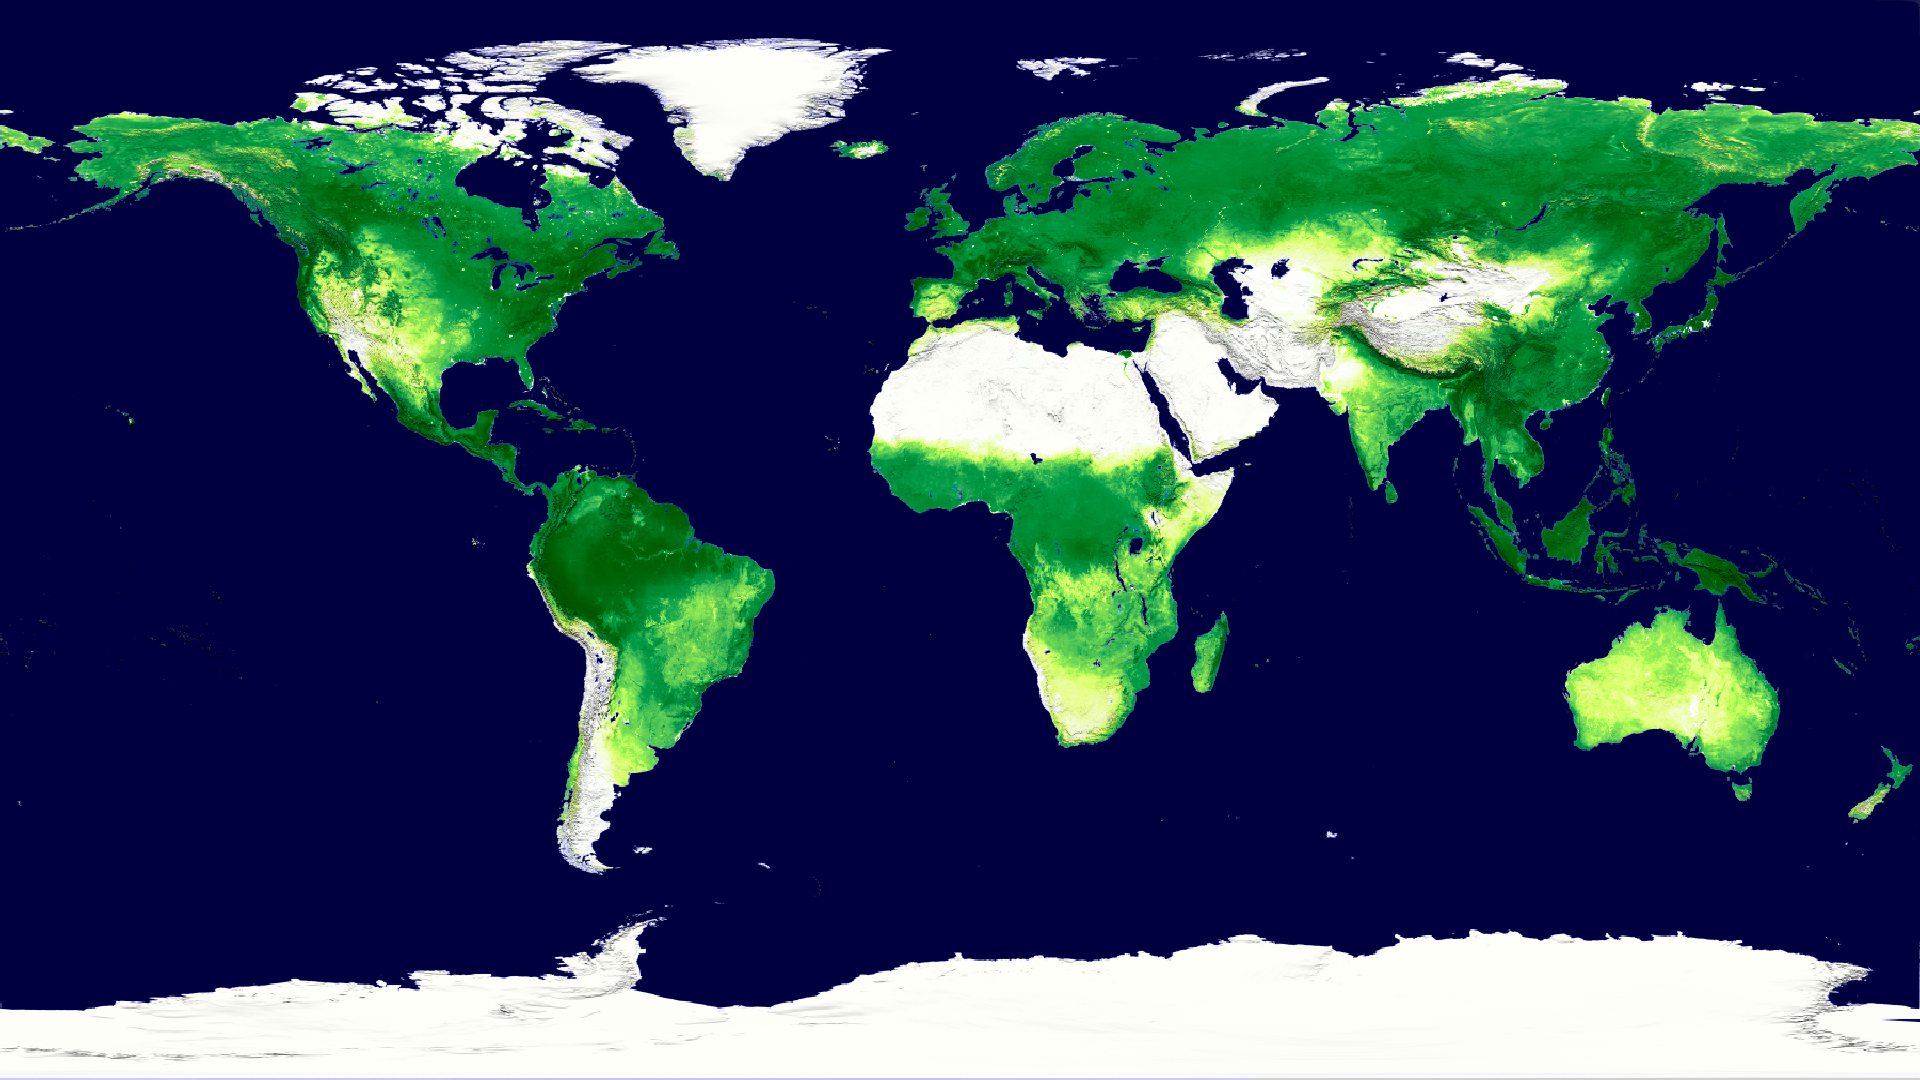 The gross primary productivity of the world's land areas for the period 2000-2009 as calculated from Terra's MODIS instrument.  The original 8-day average GPP data has been smoothed to a 24-day average to make the animation less noisy. This product is available through our Web Map Service.